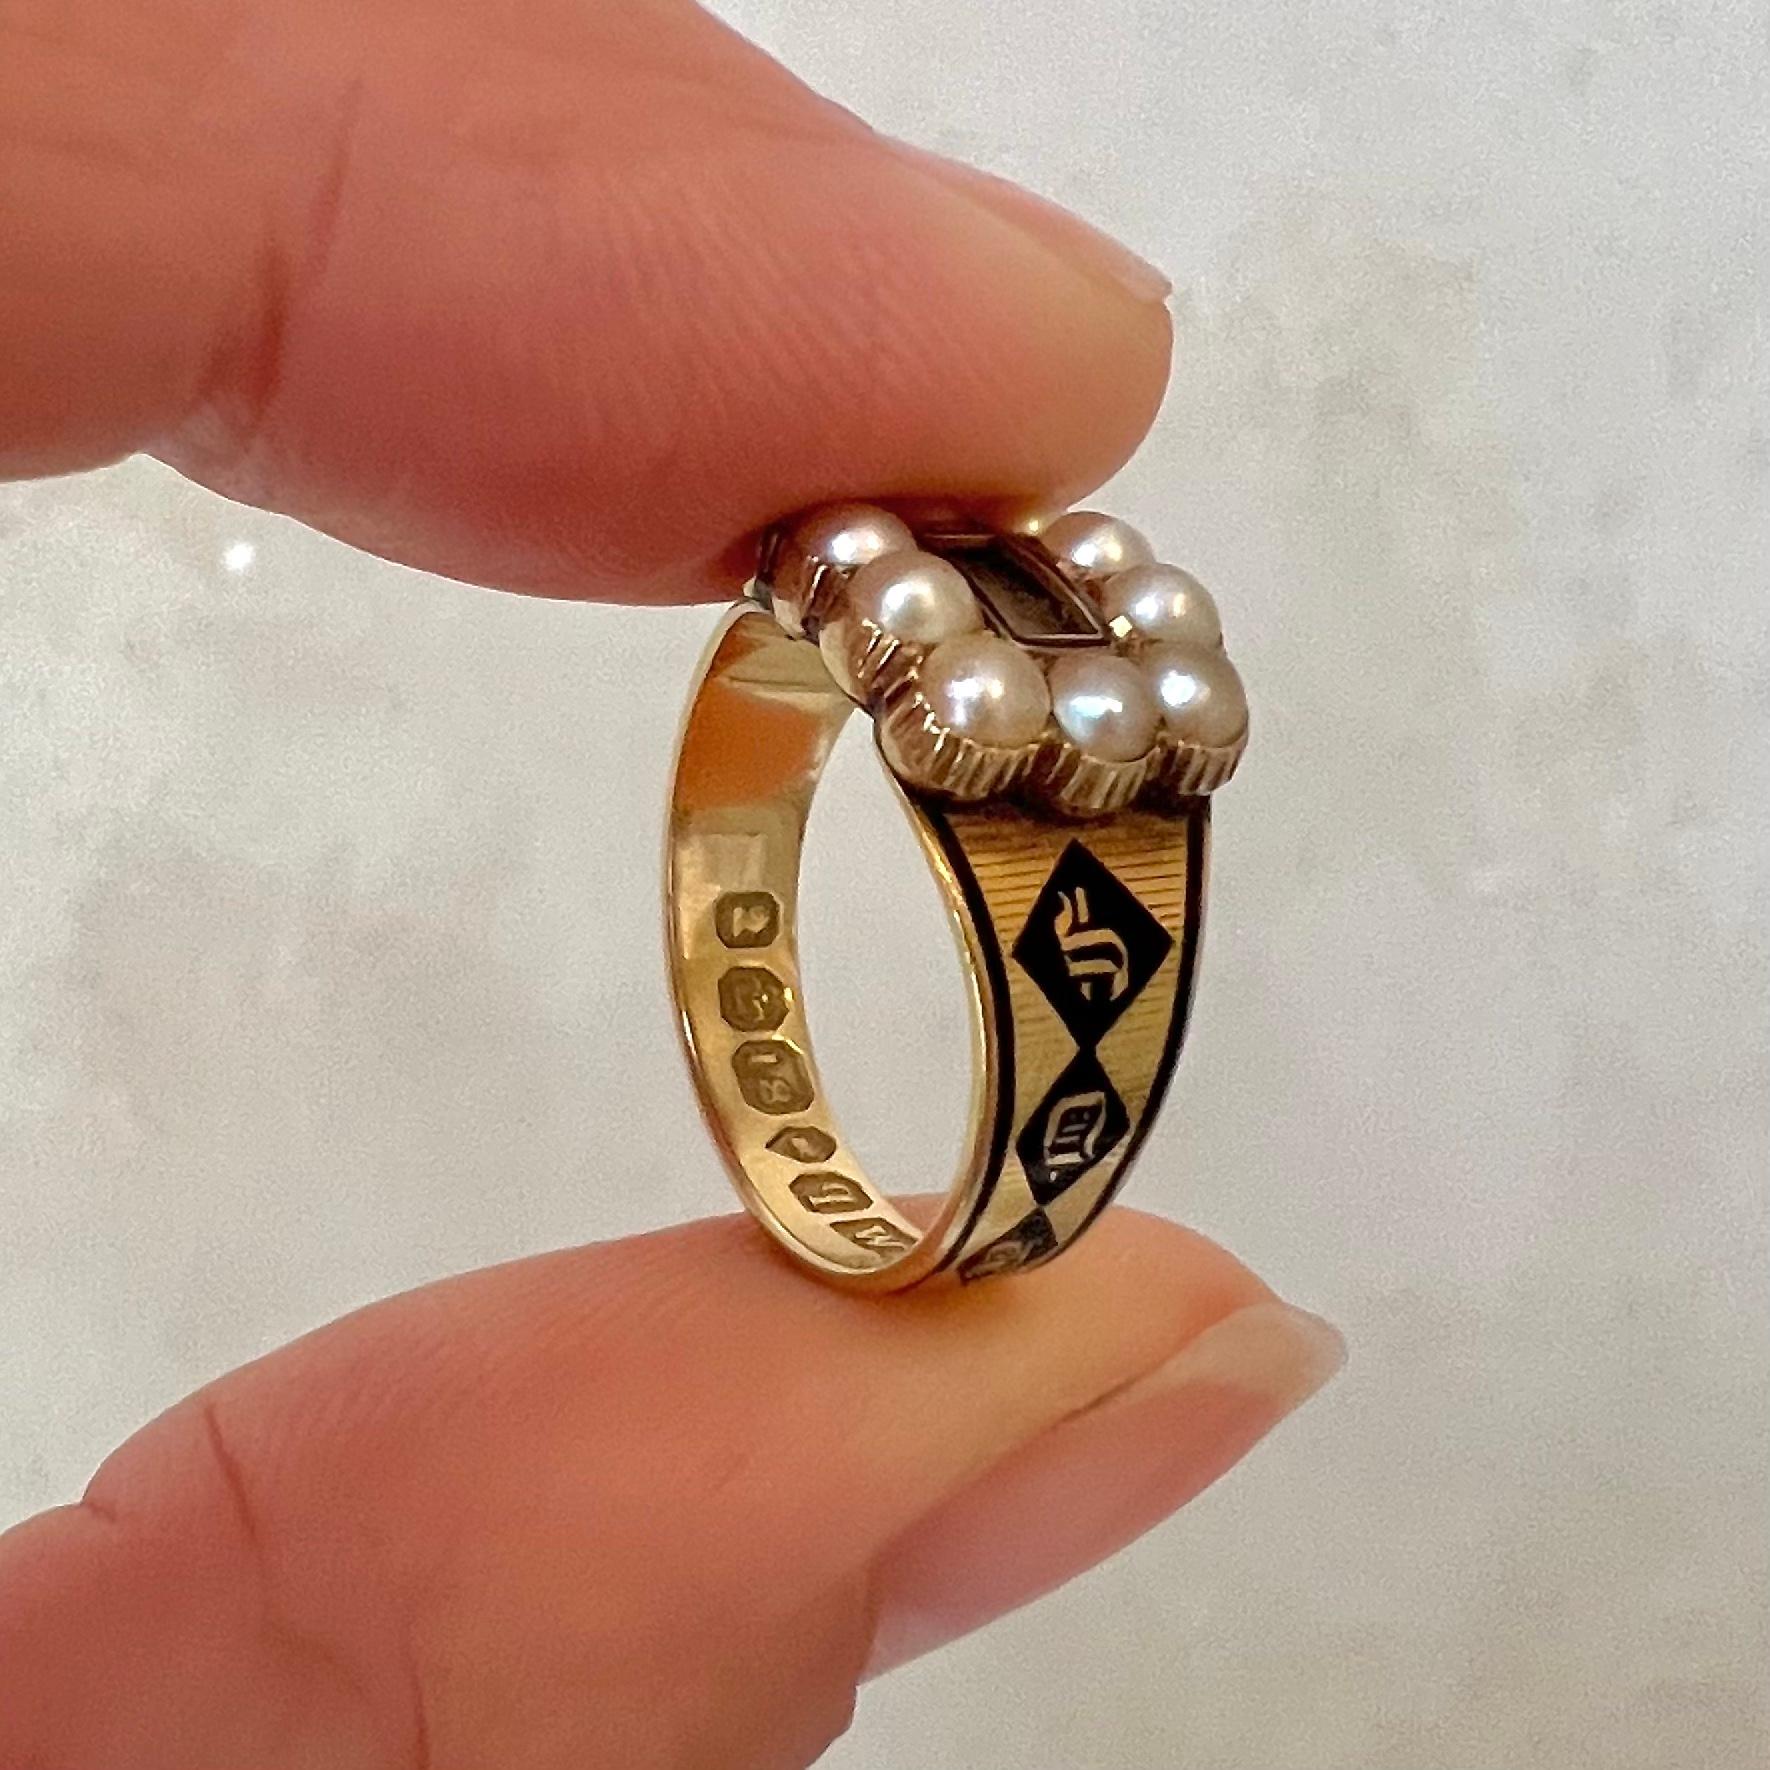 Antique English 18K Gold Memorial Ring from 1831 with Pearls and Black Enamel For Sale 3